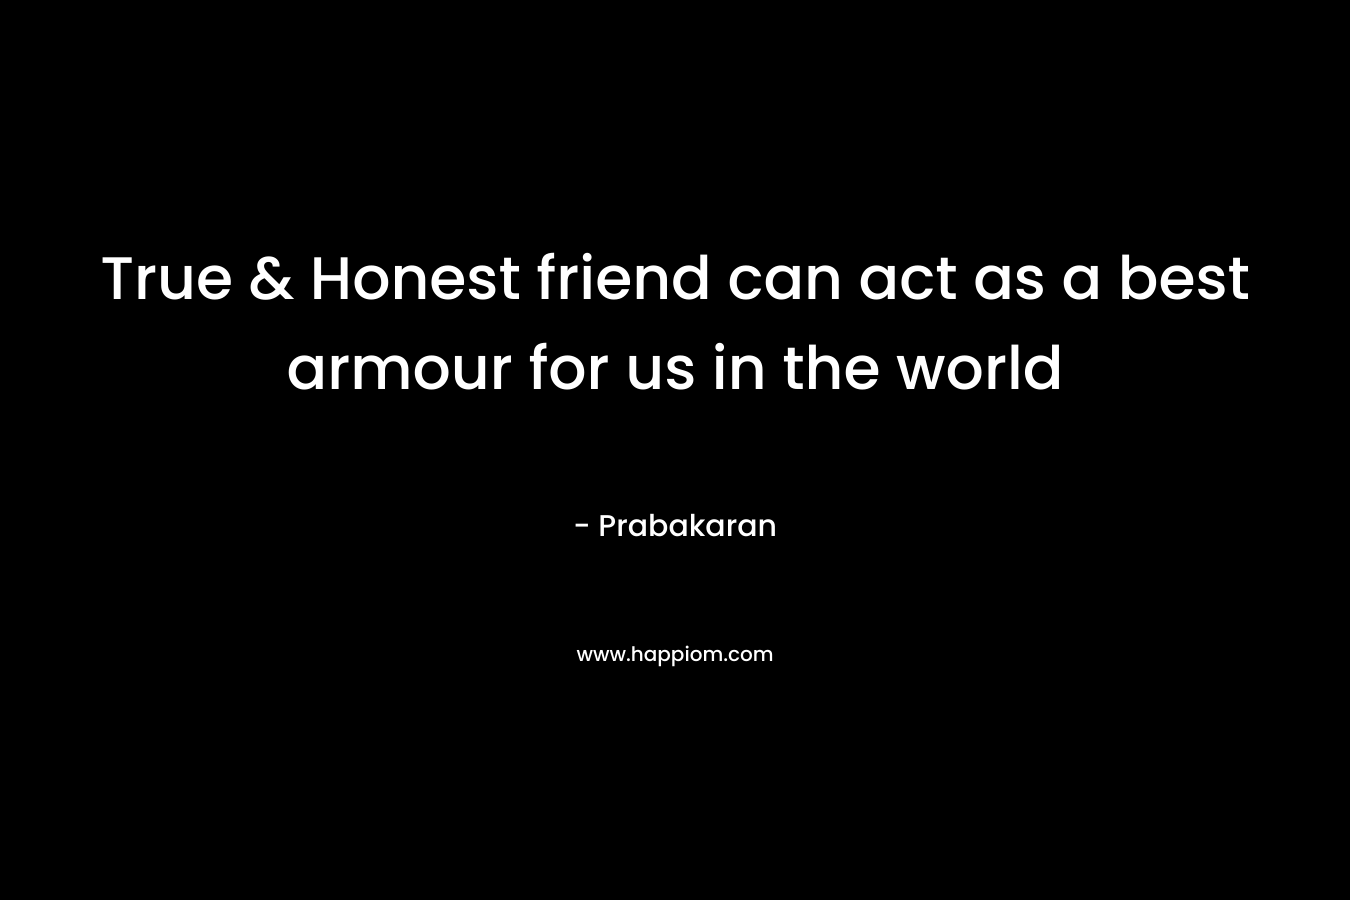 True & Honest friend can act as a best armour for us in the world – Prabakaran